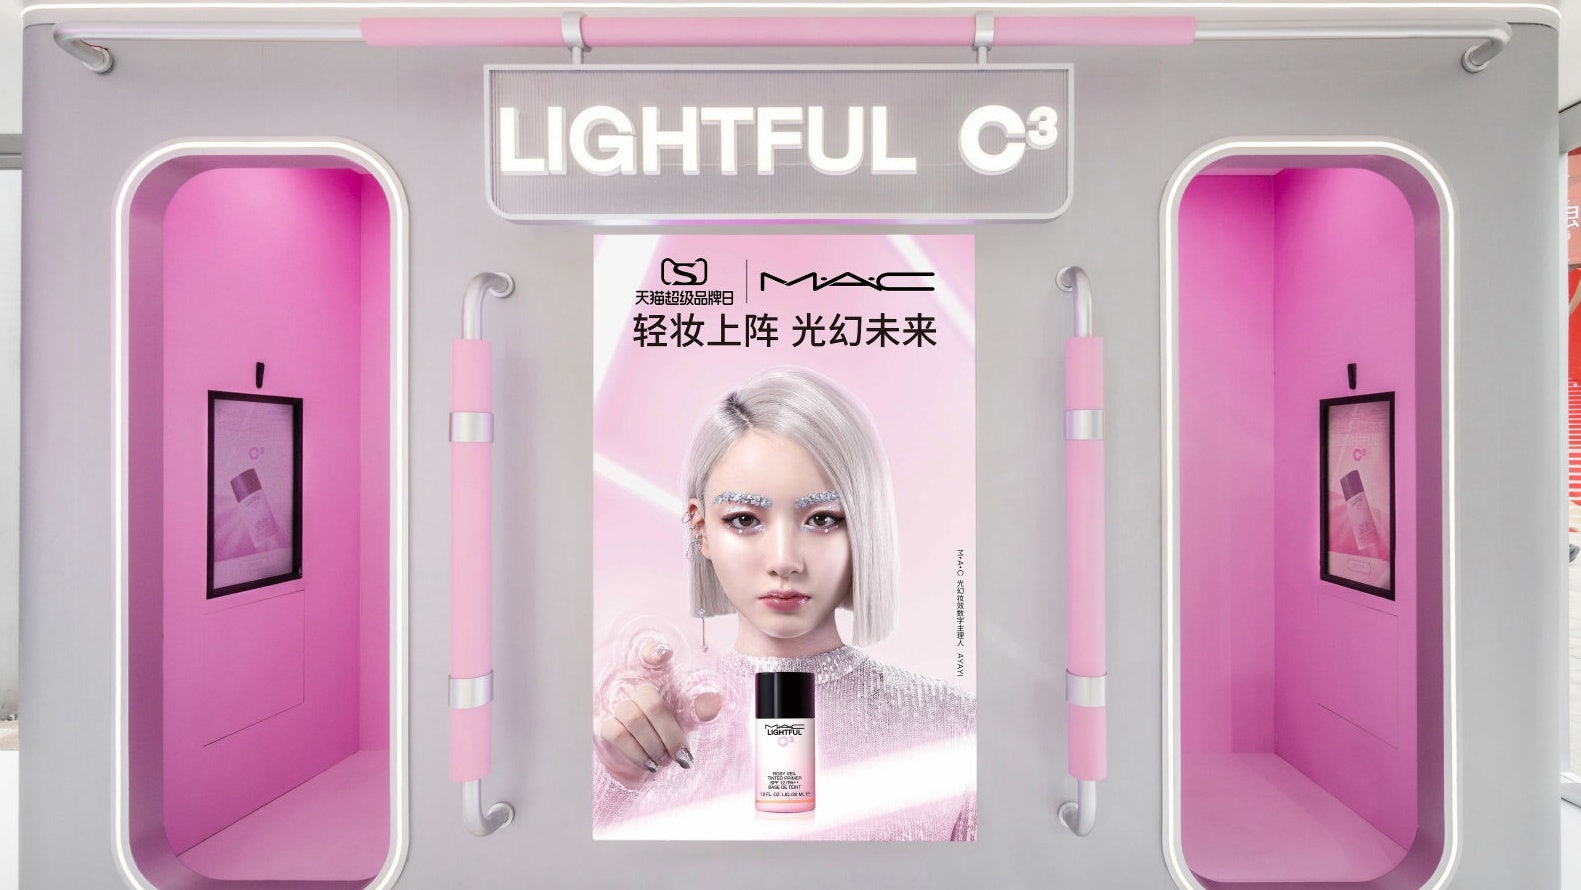 Digital optimism poses an exciting opportunity for beauty’s metaverse ambitions. But Beijing's ban on all crypto activities means brands should be cautious. Photo: M.A.C